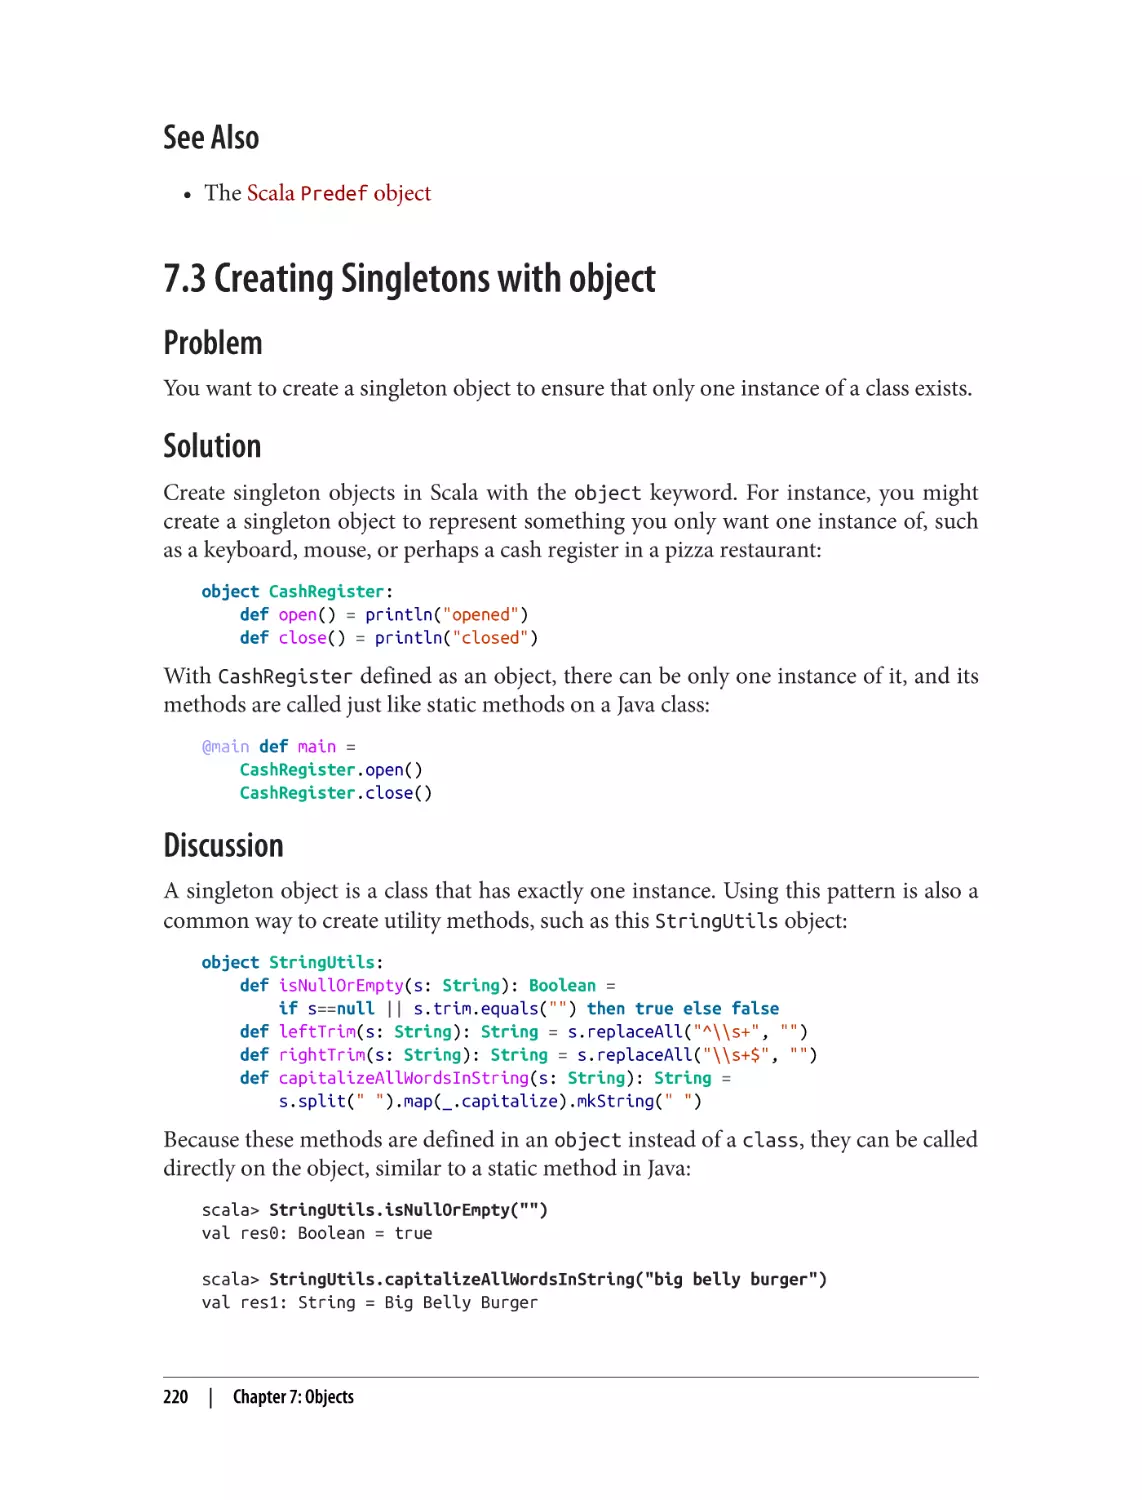 See Also
7.3 Creating Singletons with object
Problem
Solution
Discussion